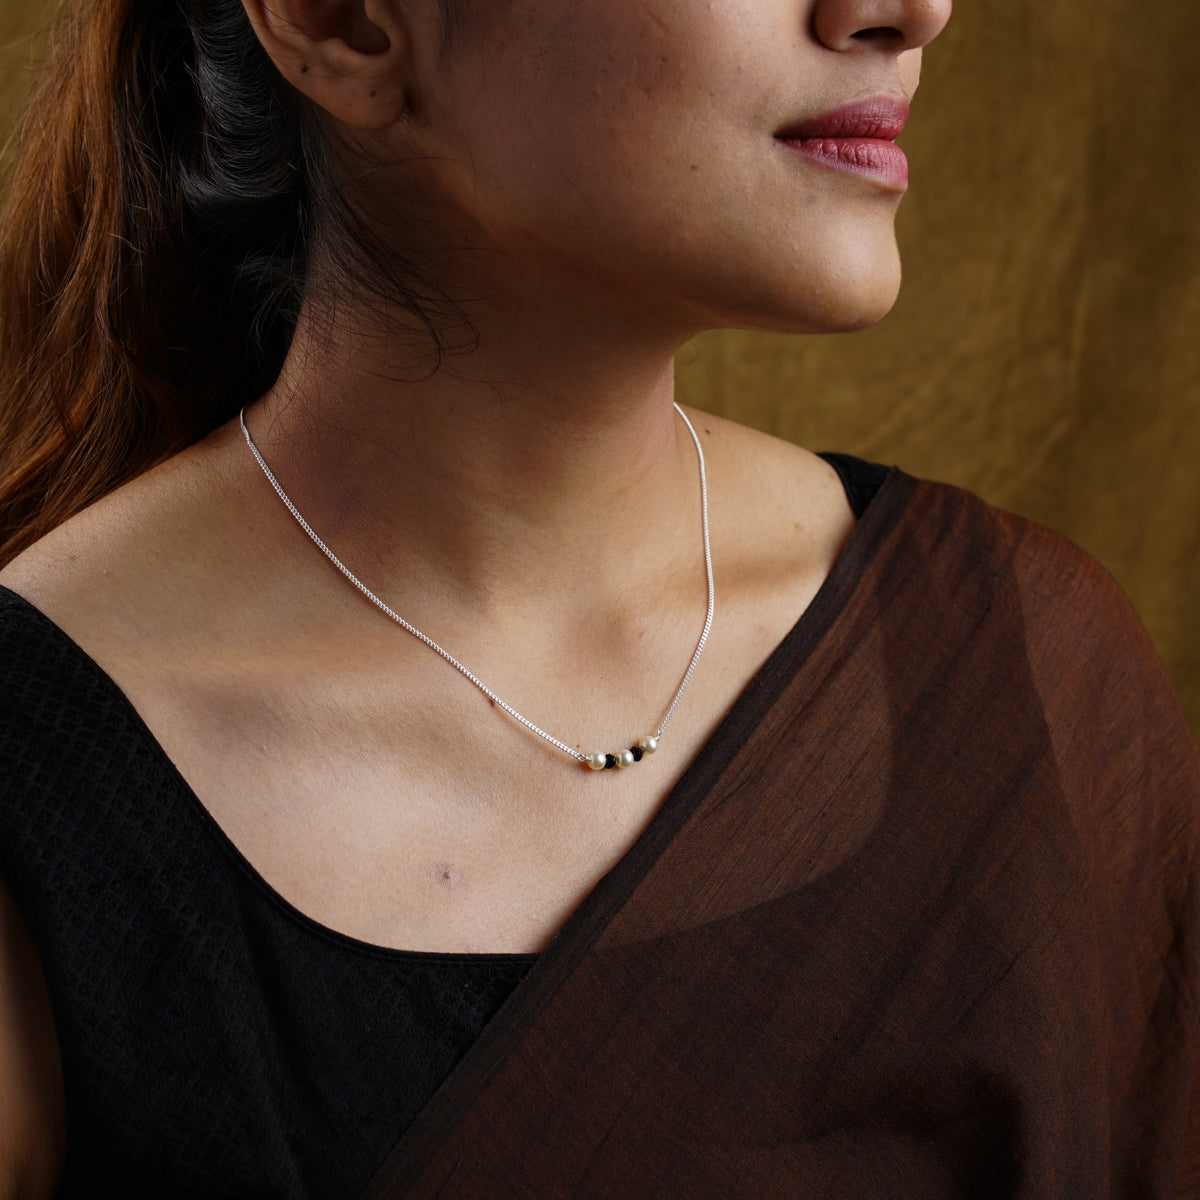 a woman wearing a black top and a white necklace